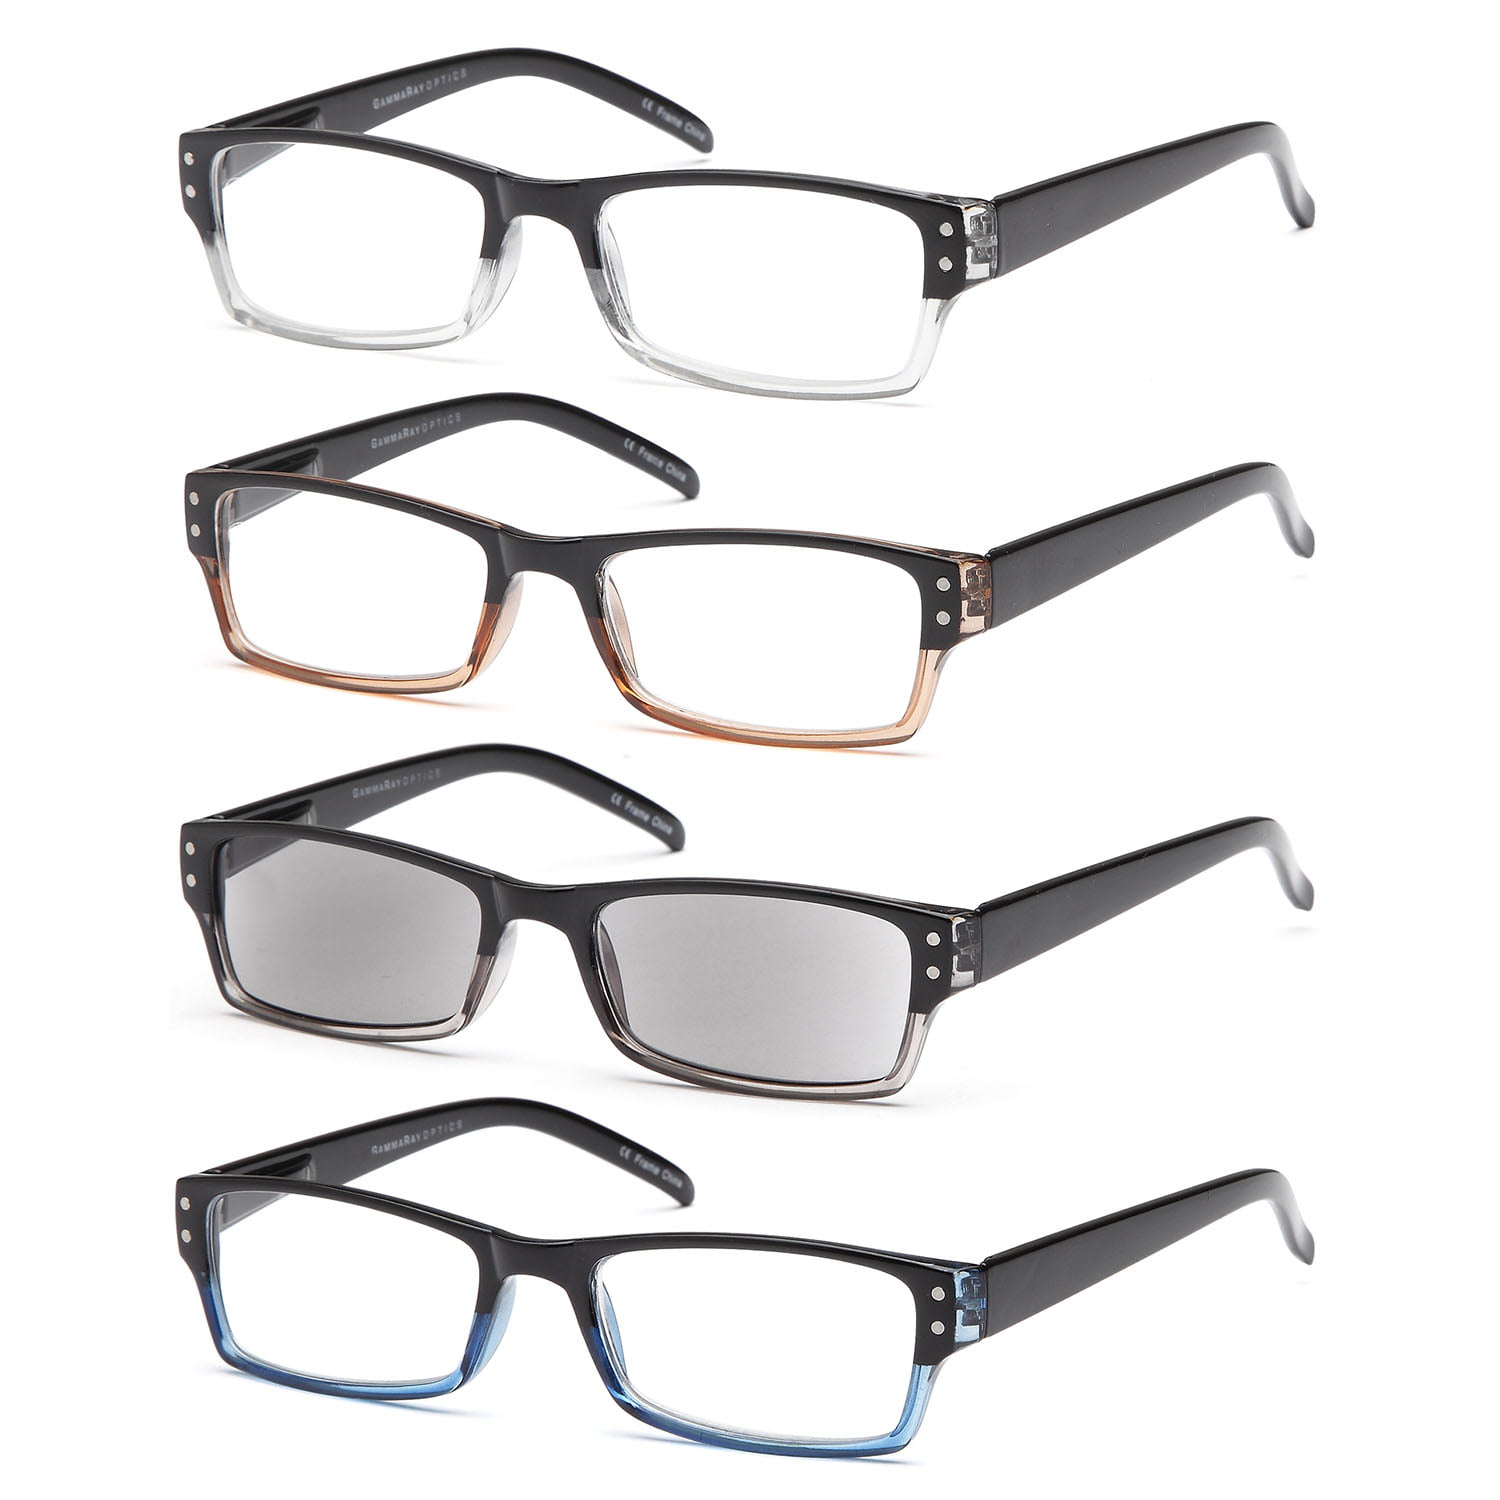 5-Pack Round Retro Reading Glasses with Spring Hinges Include Sunshine Readers 